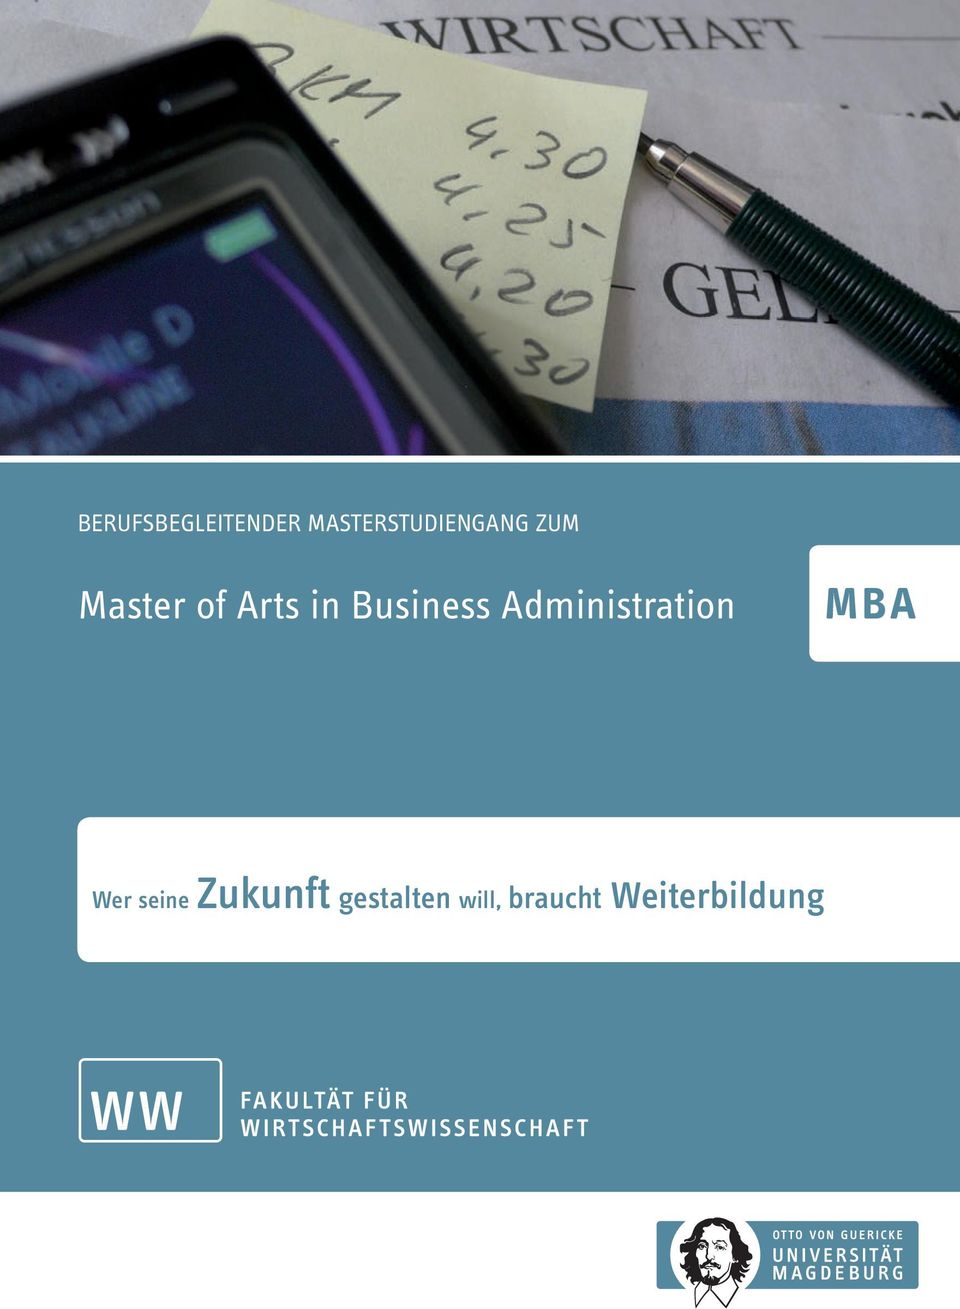 Arts in Business Administration MBA